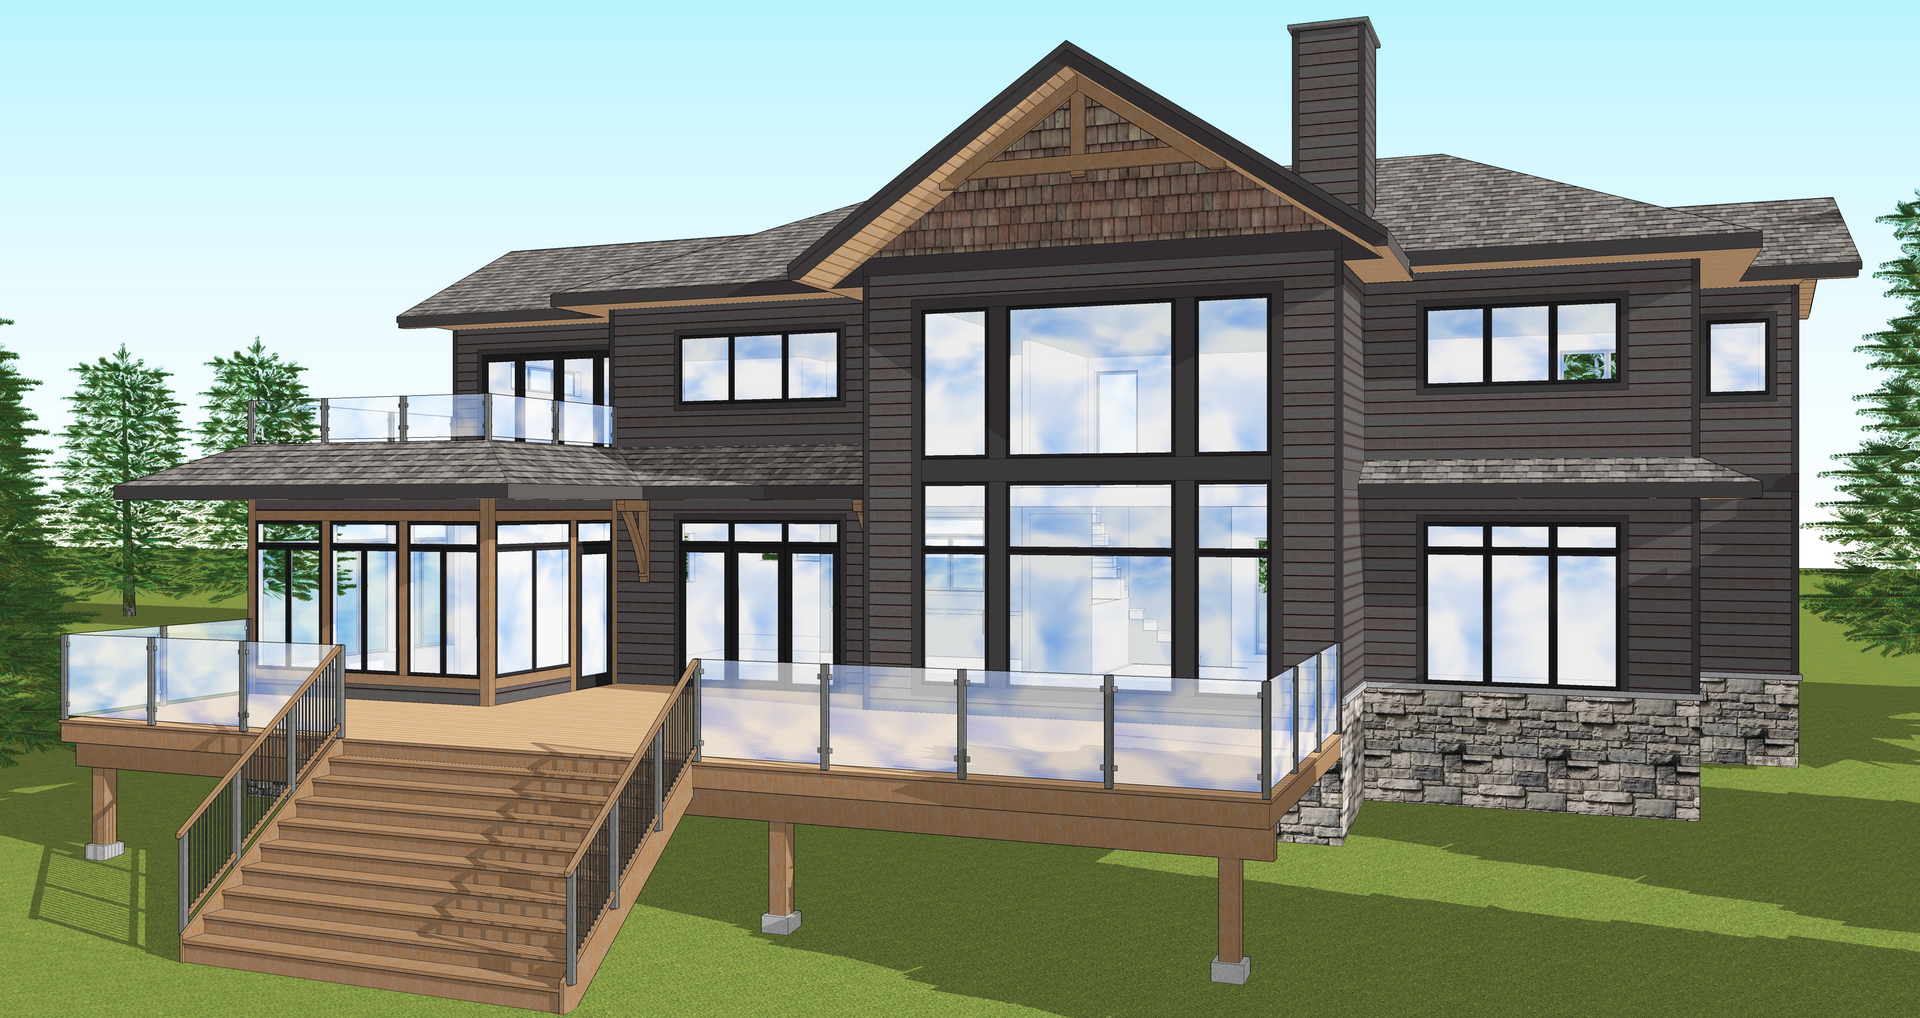 Finished 3D architectural design drawing of cottage